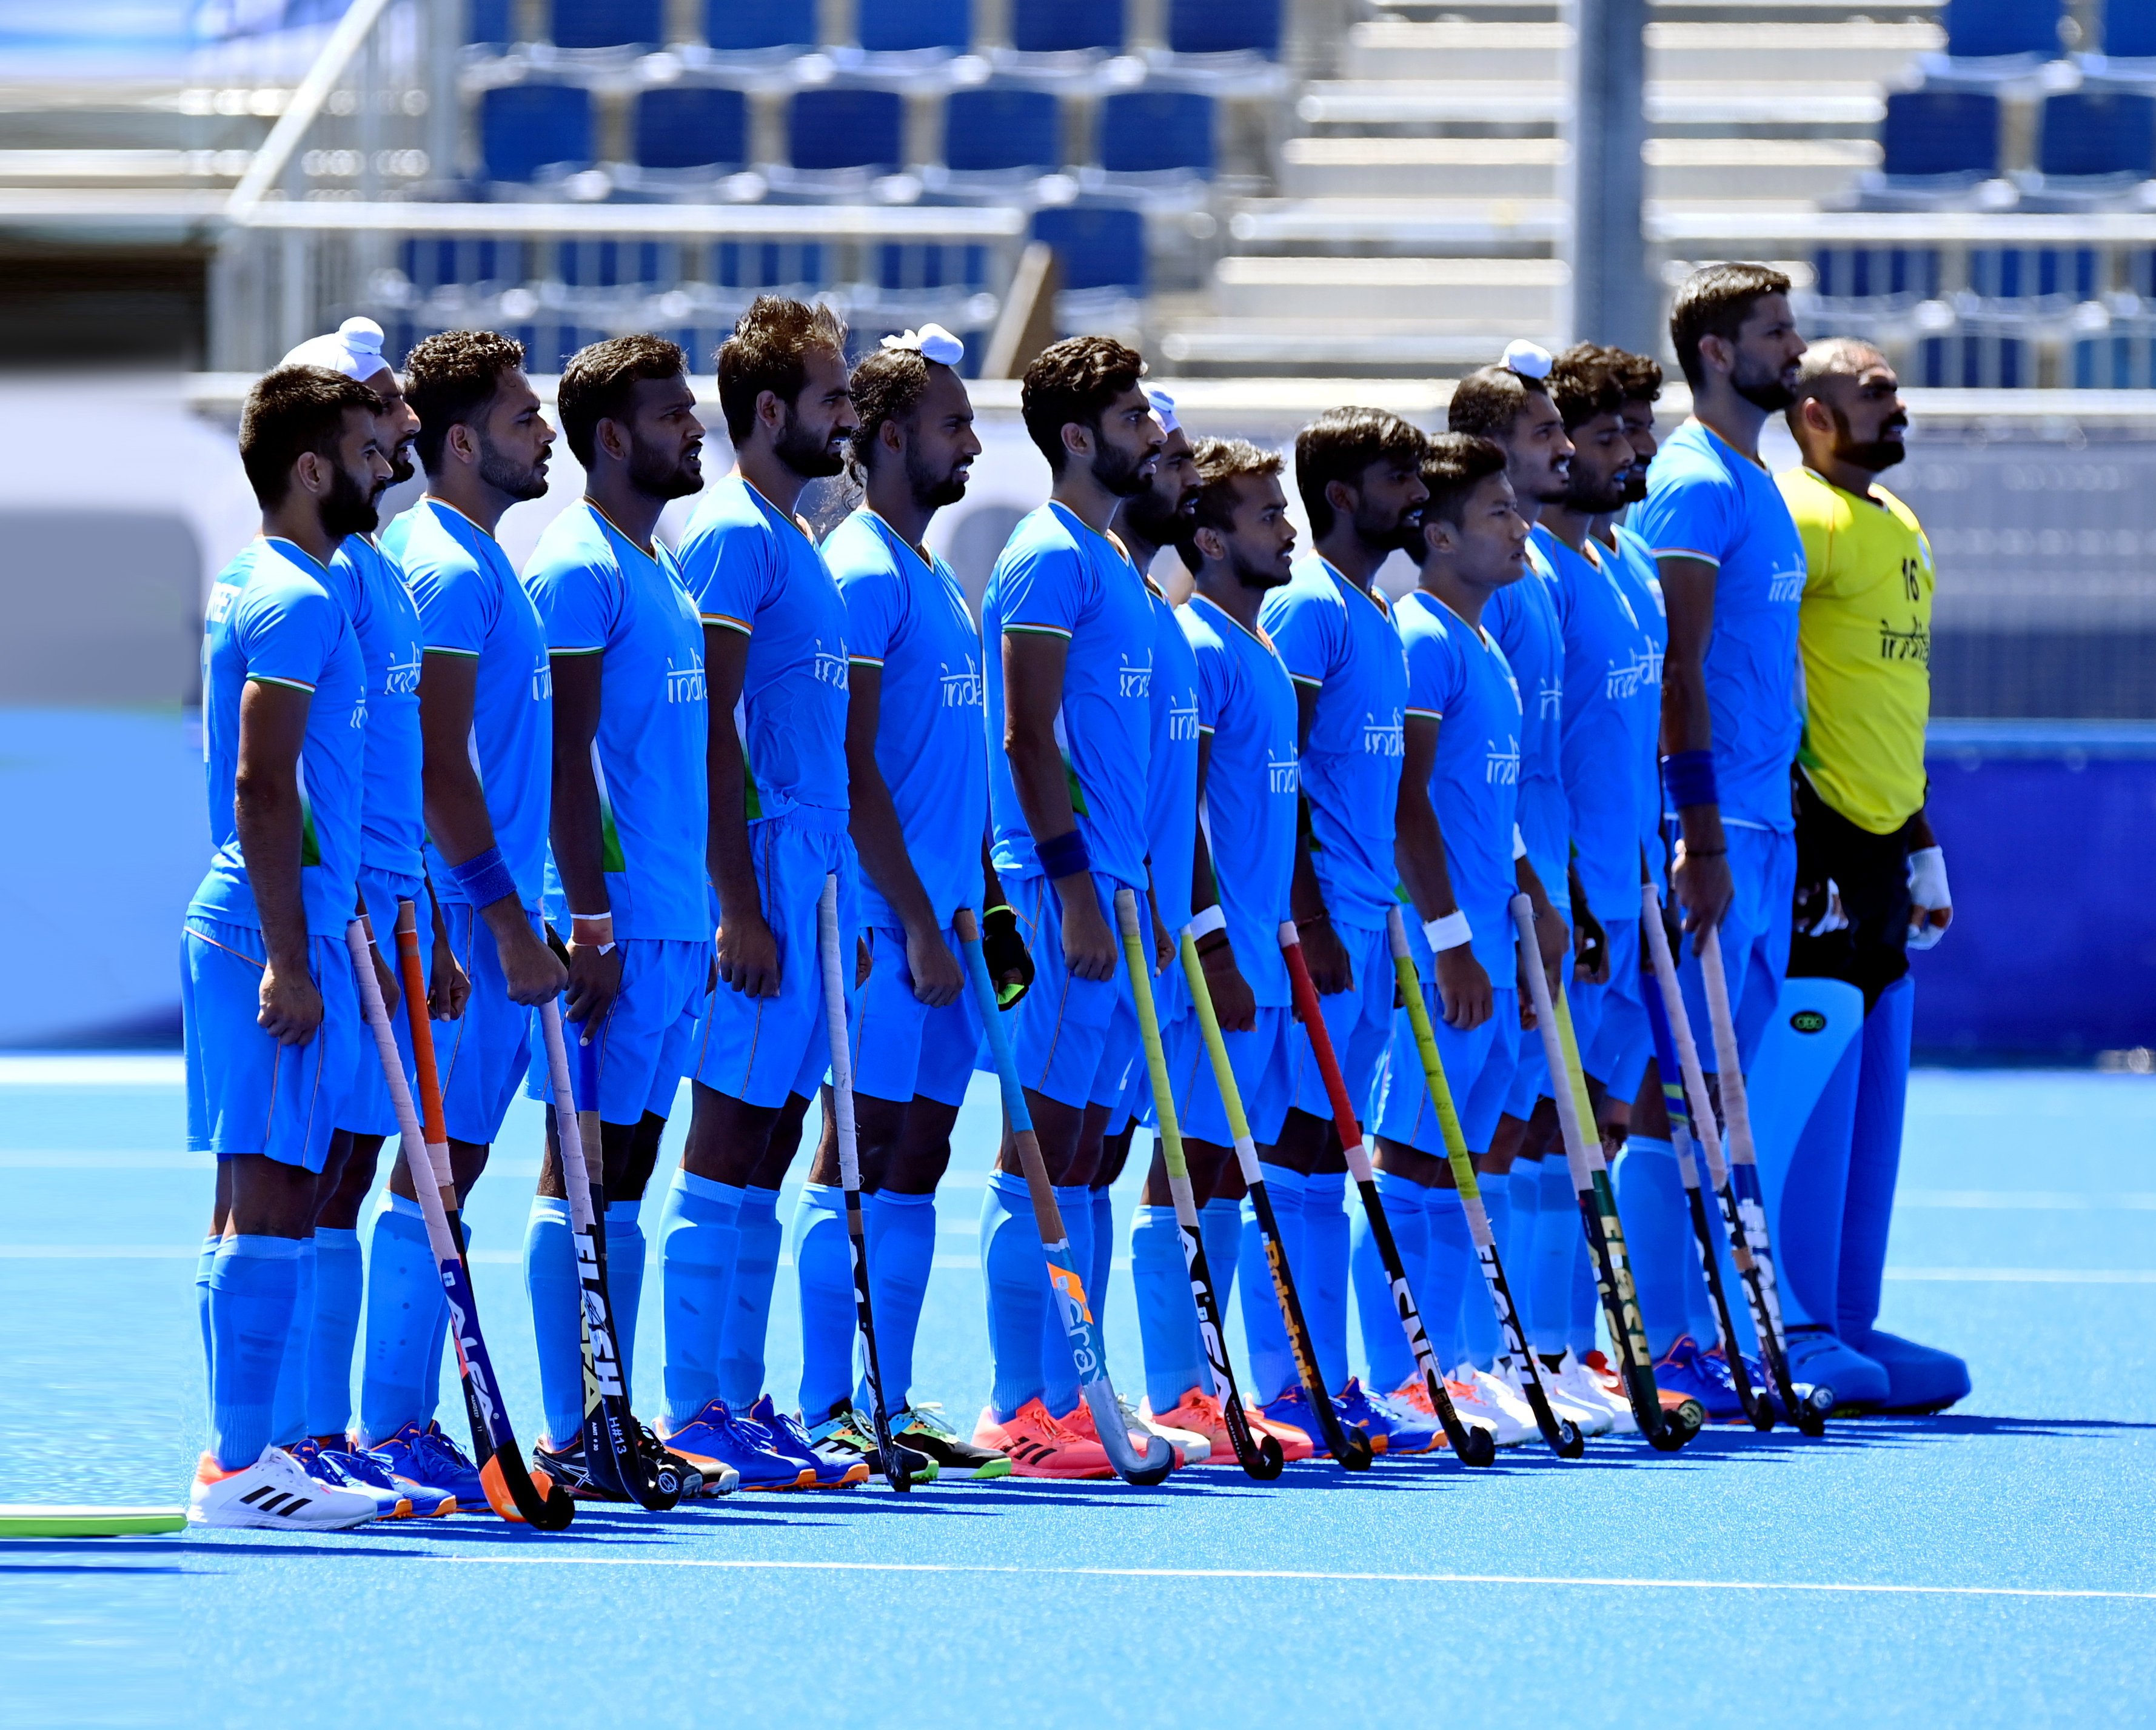 Twitter reacts as Indian men’s hockey team claim an Olympic medal after 41 years